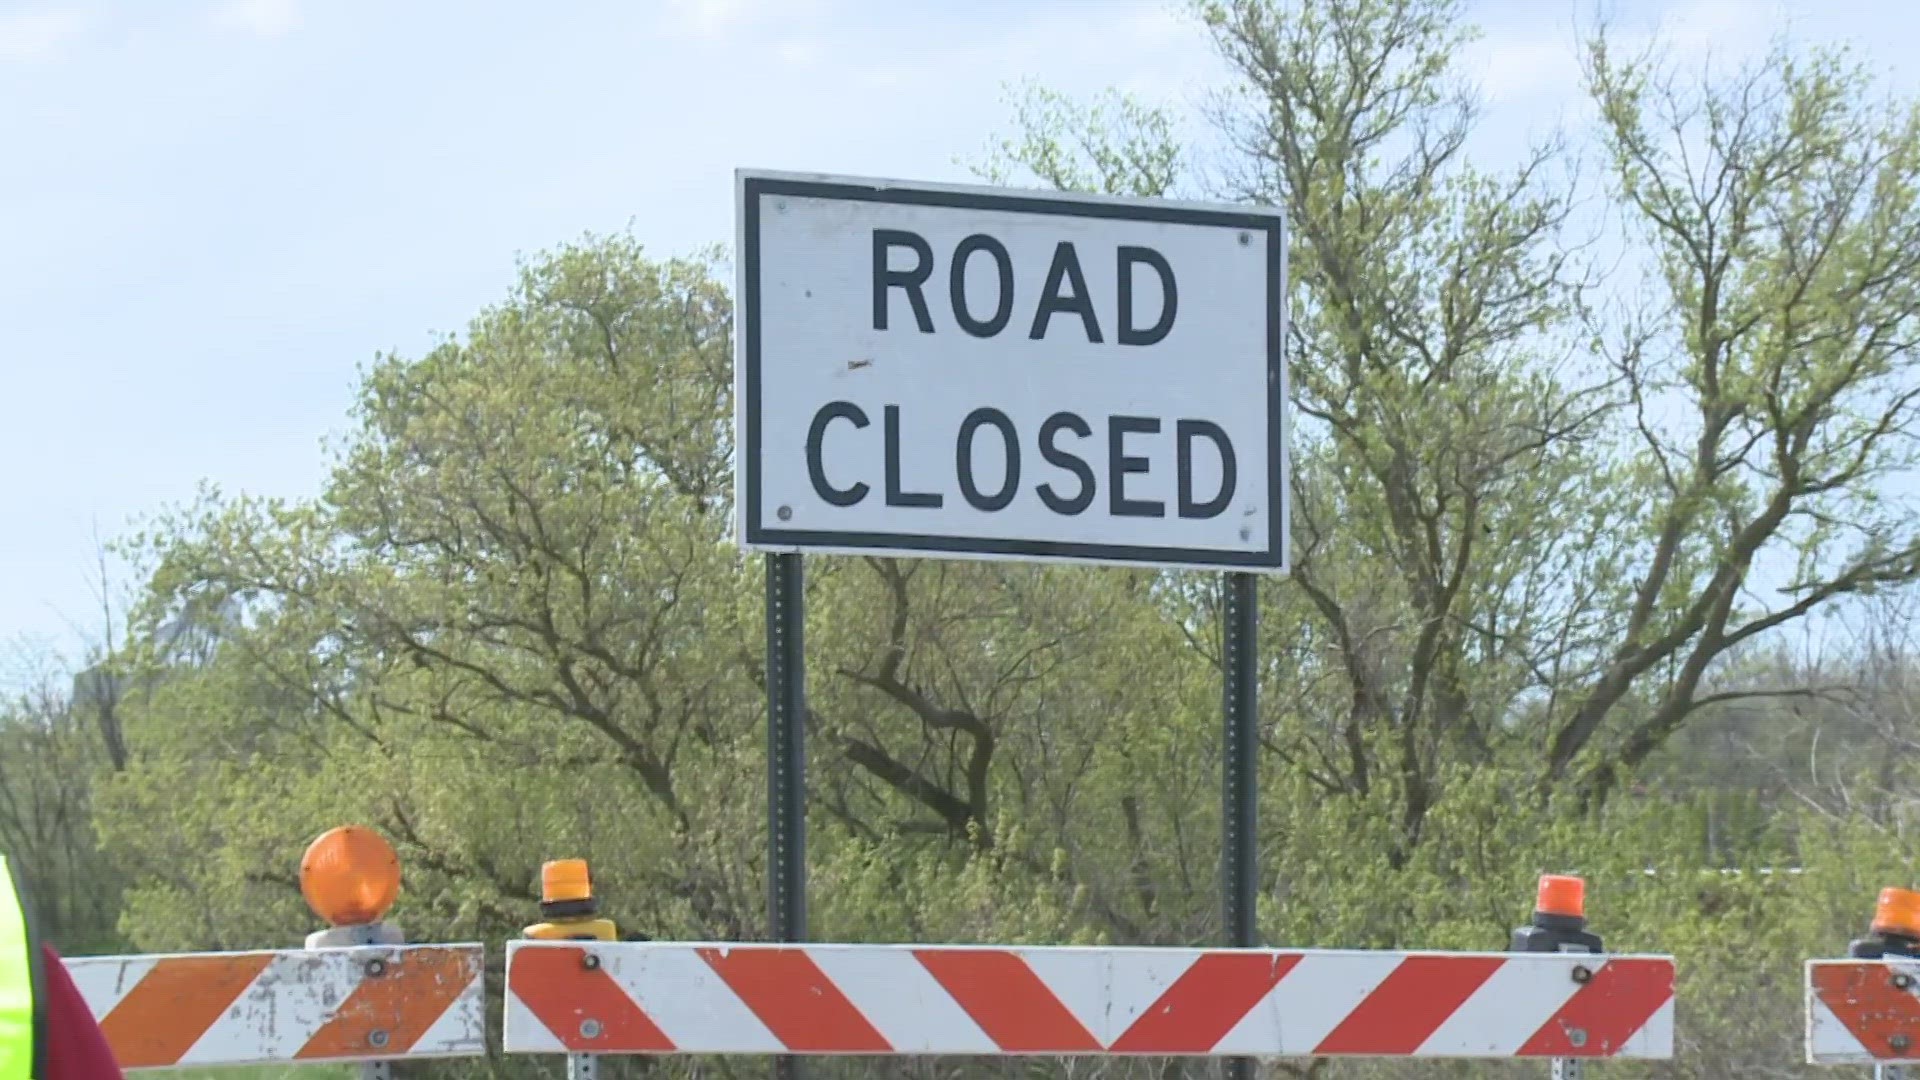 Road construction is something you'll need to keep in mind if you're traveling west to get to Tulip Time.